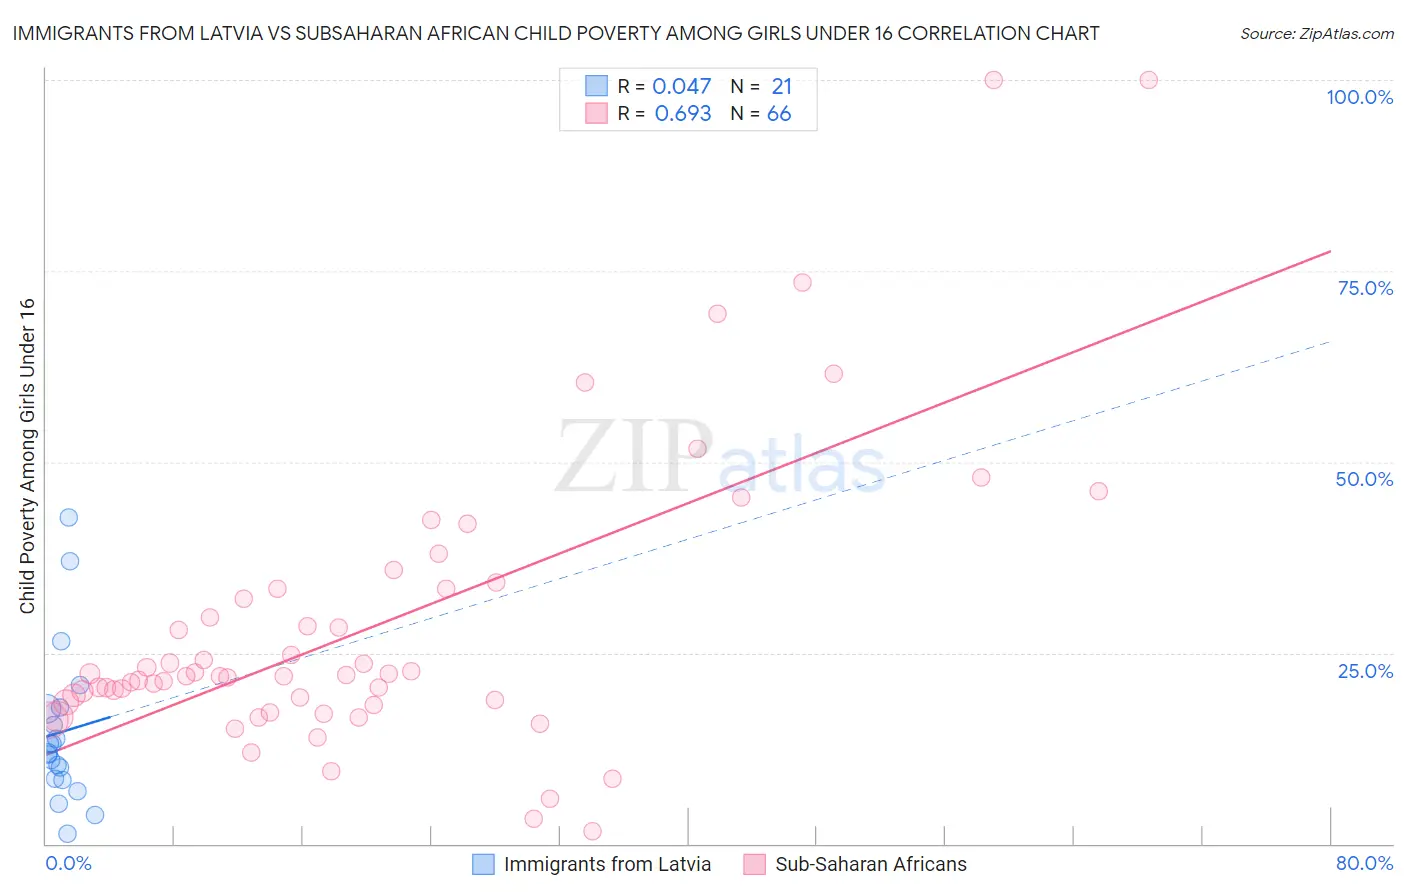 Immigrants from Latvia vs Subsaharan African Child Poverty Among Girls Under 16